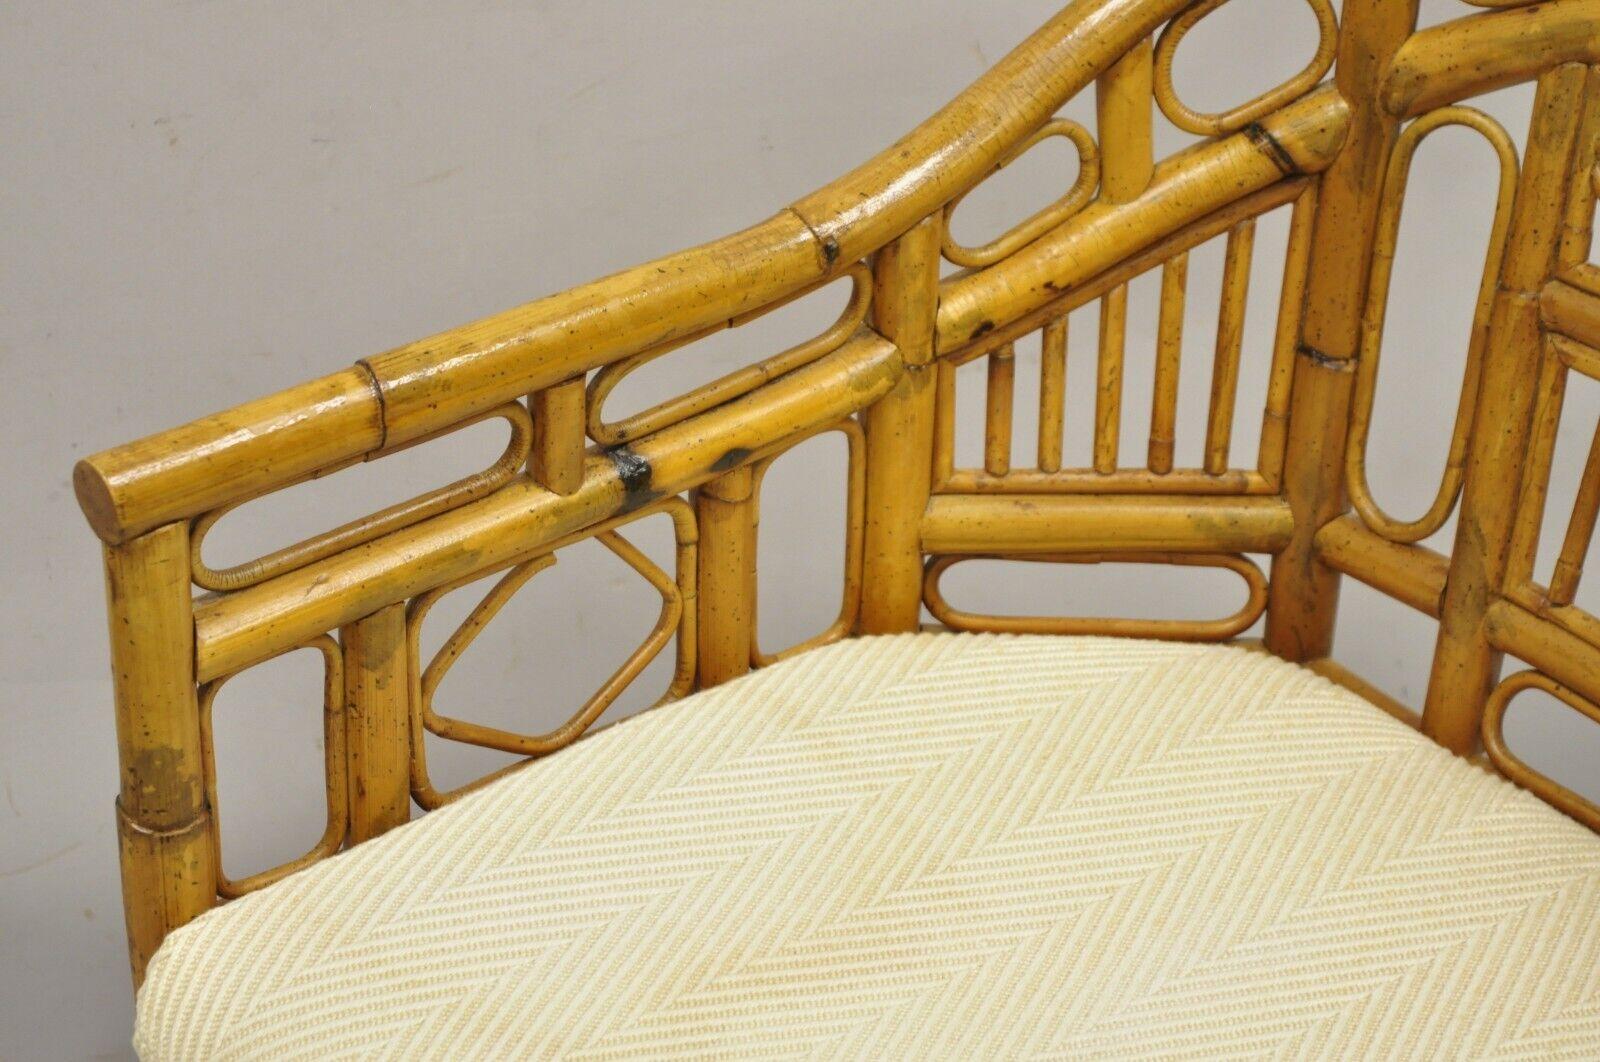 20th Century Vintage Lane Bamboo Fretwork Rattan Hollywood Regency Club Lounge Chair For Sale